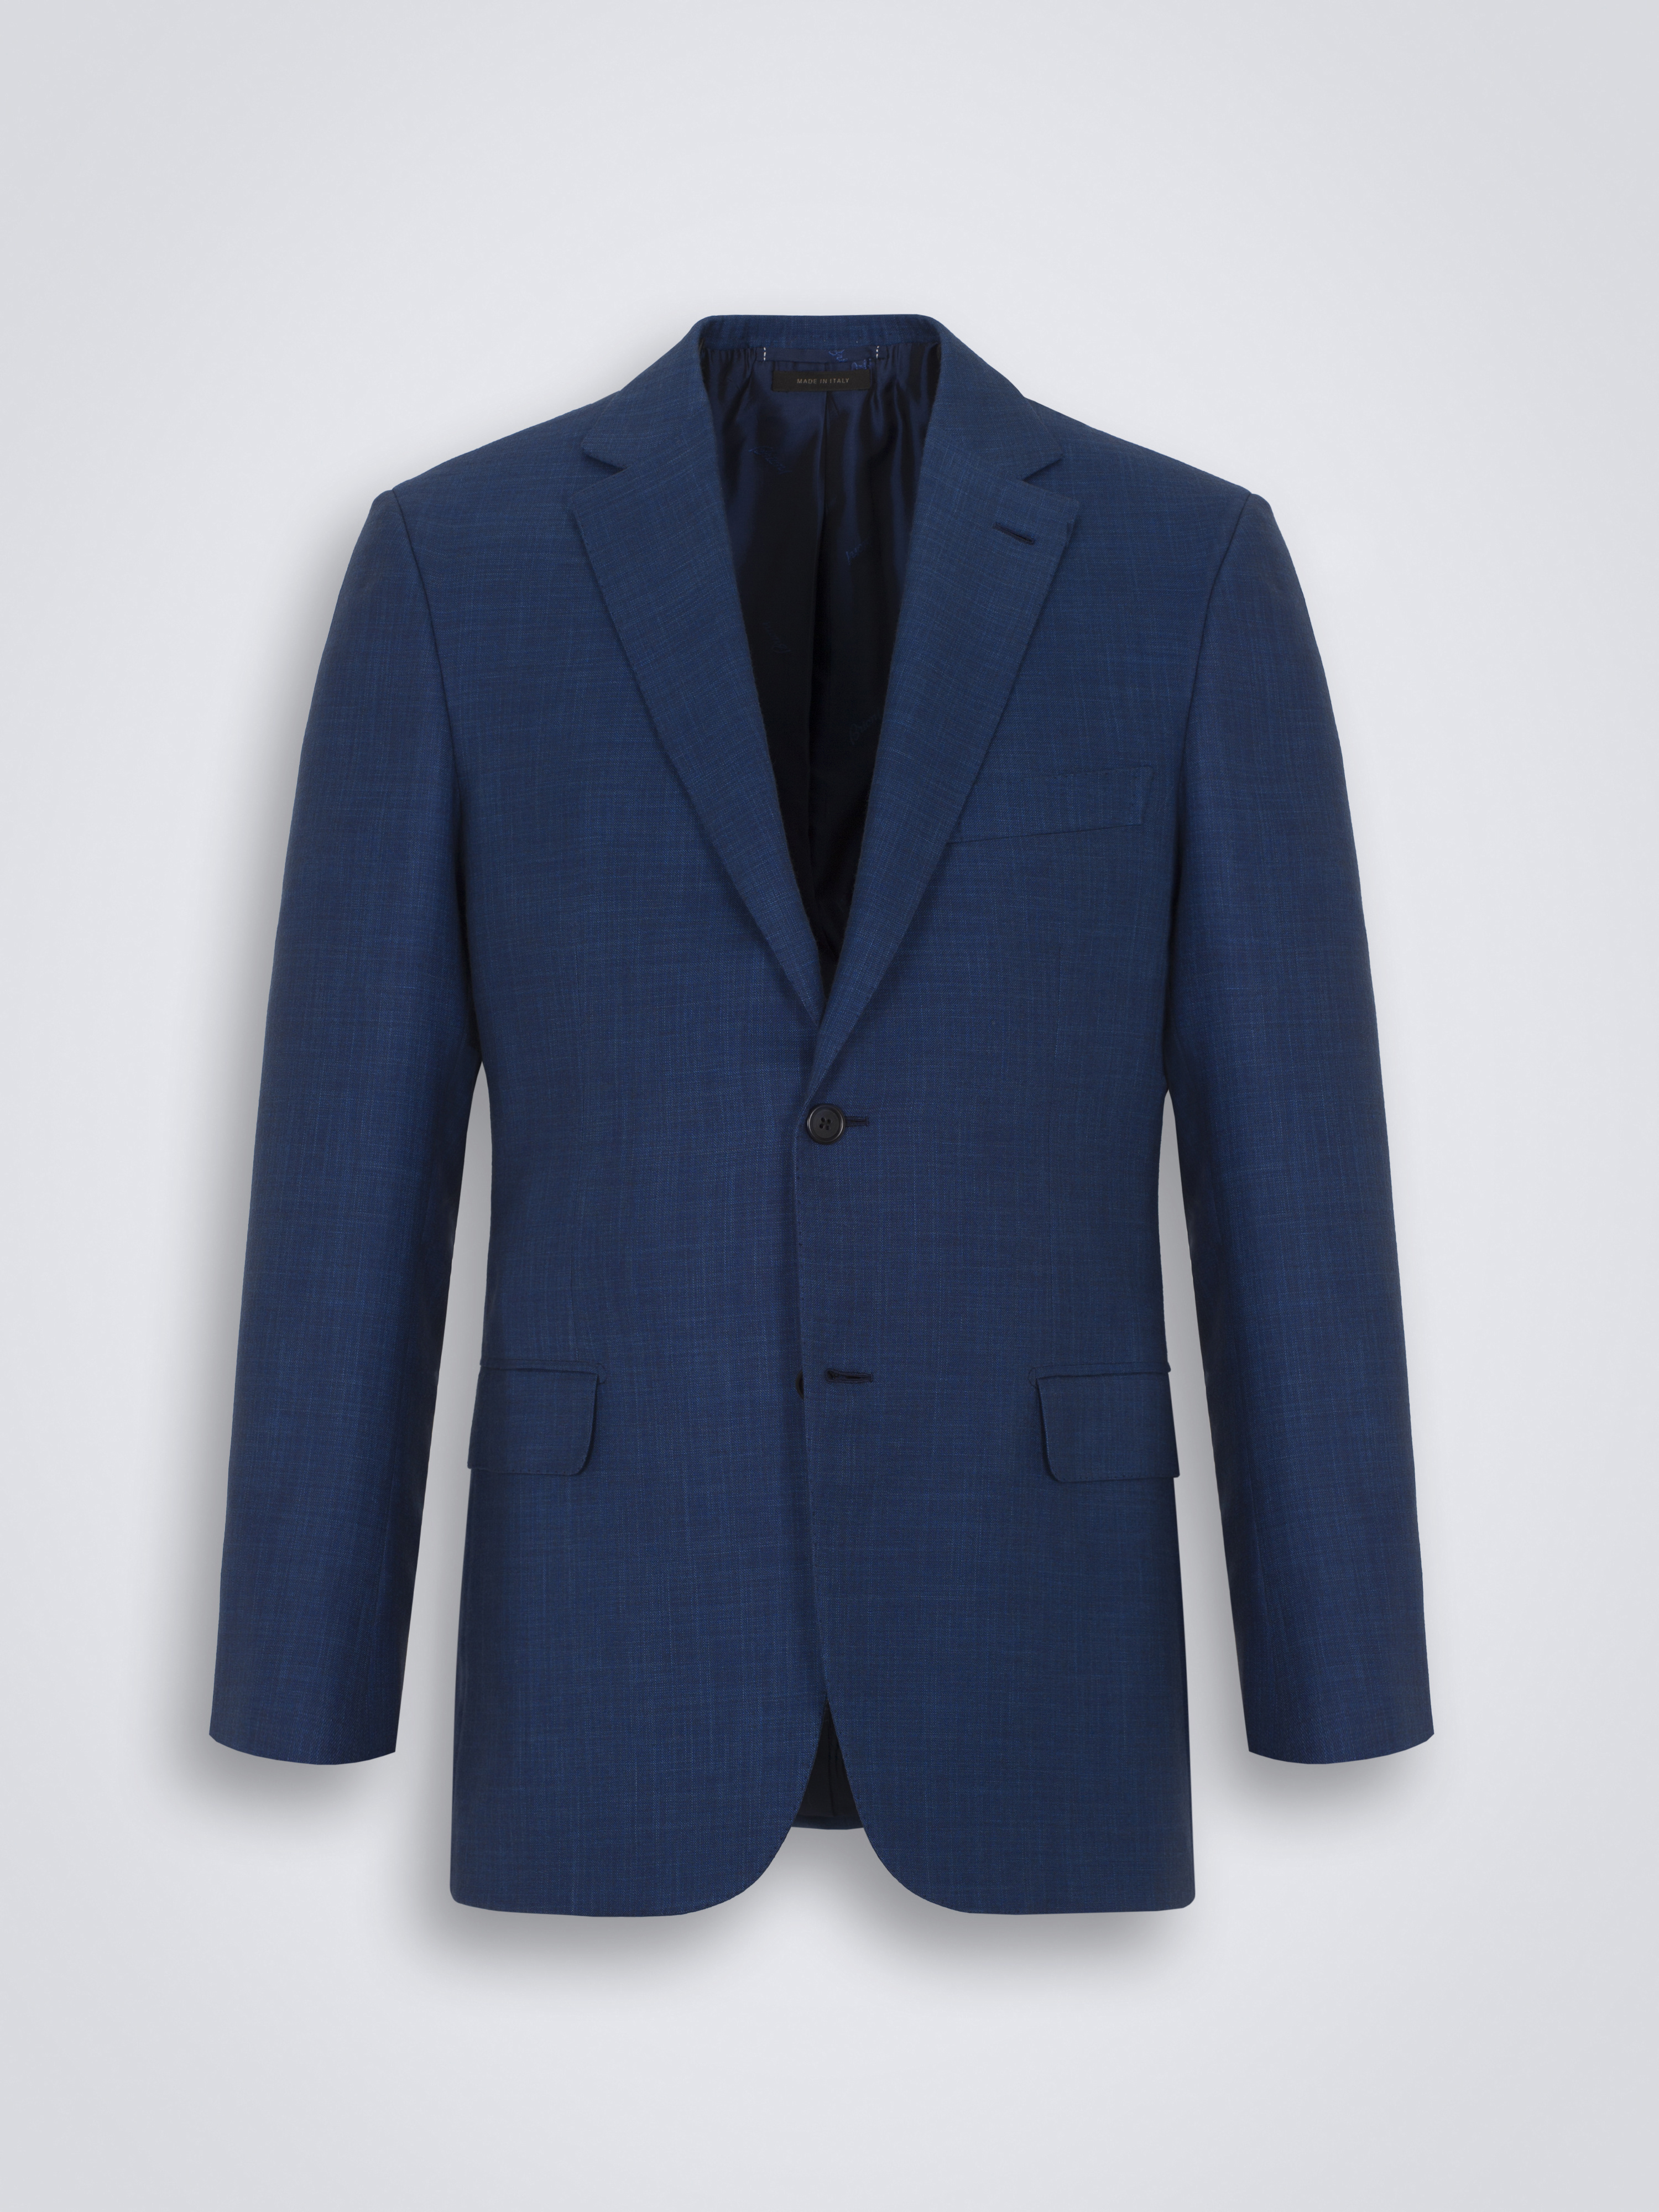 Royal blue vicuña, cashmere and silk Ravello jacket